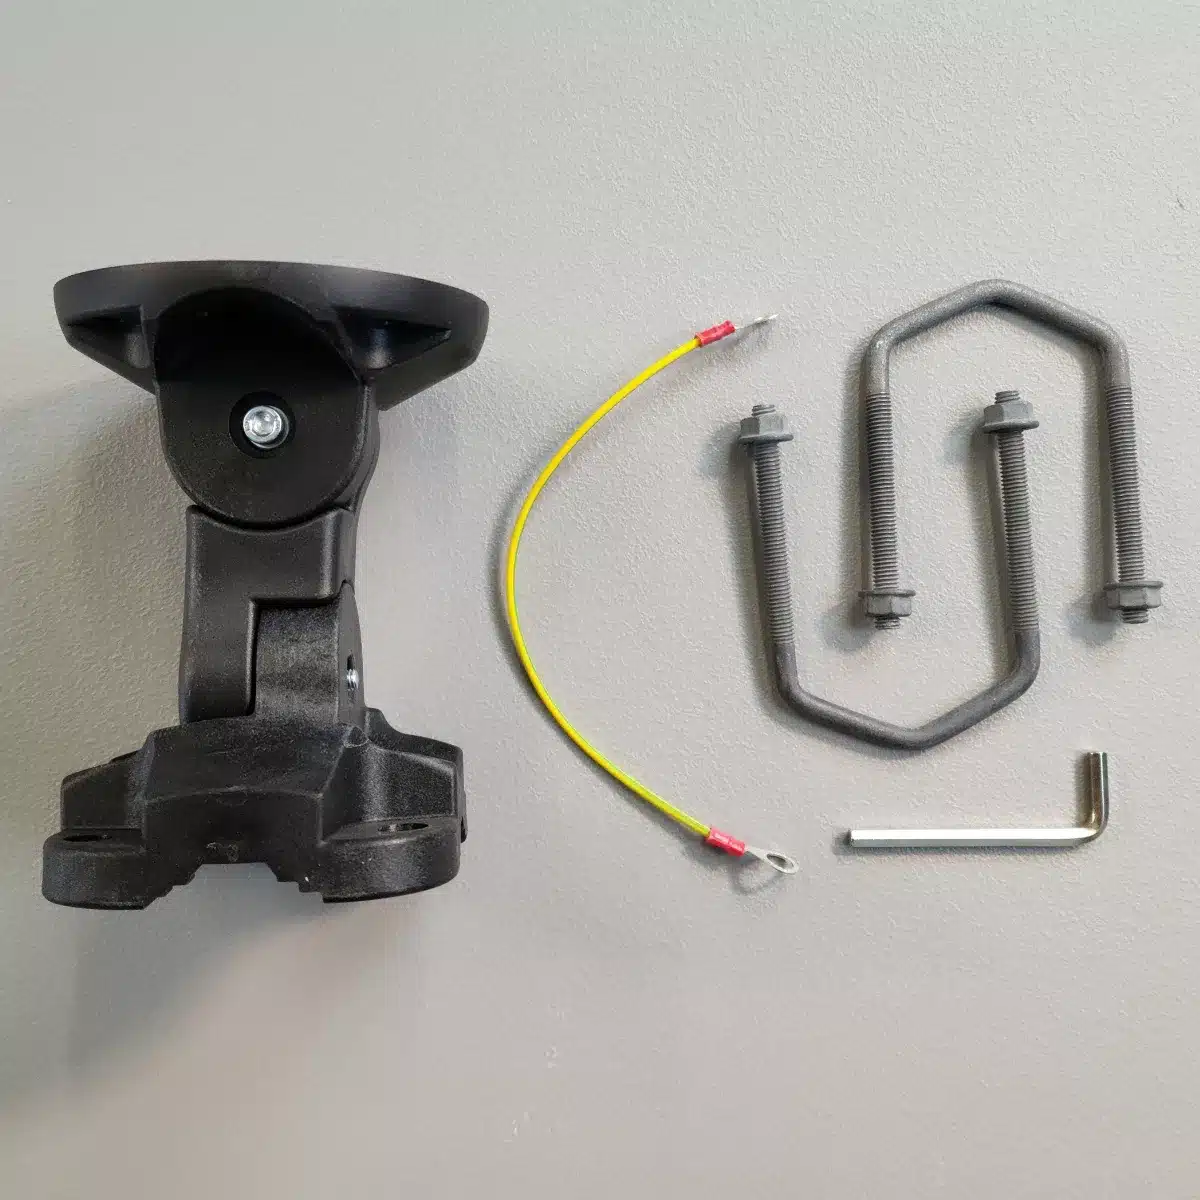 WiSecure Mounting System for WiFiX antennas and enclosures. Hardware Image